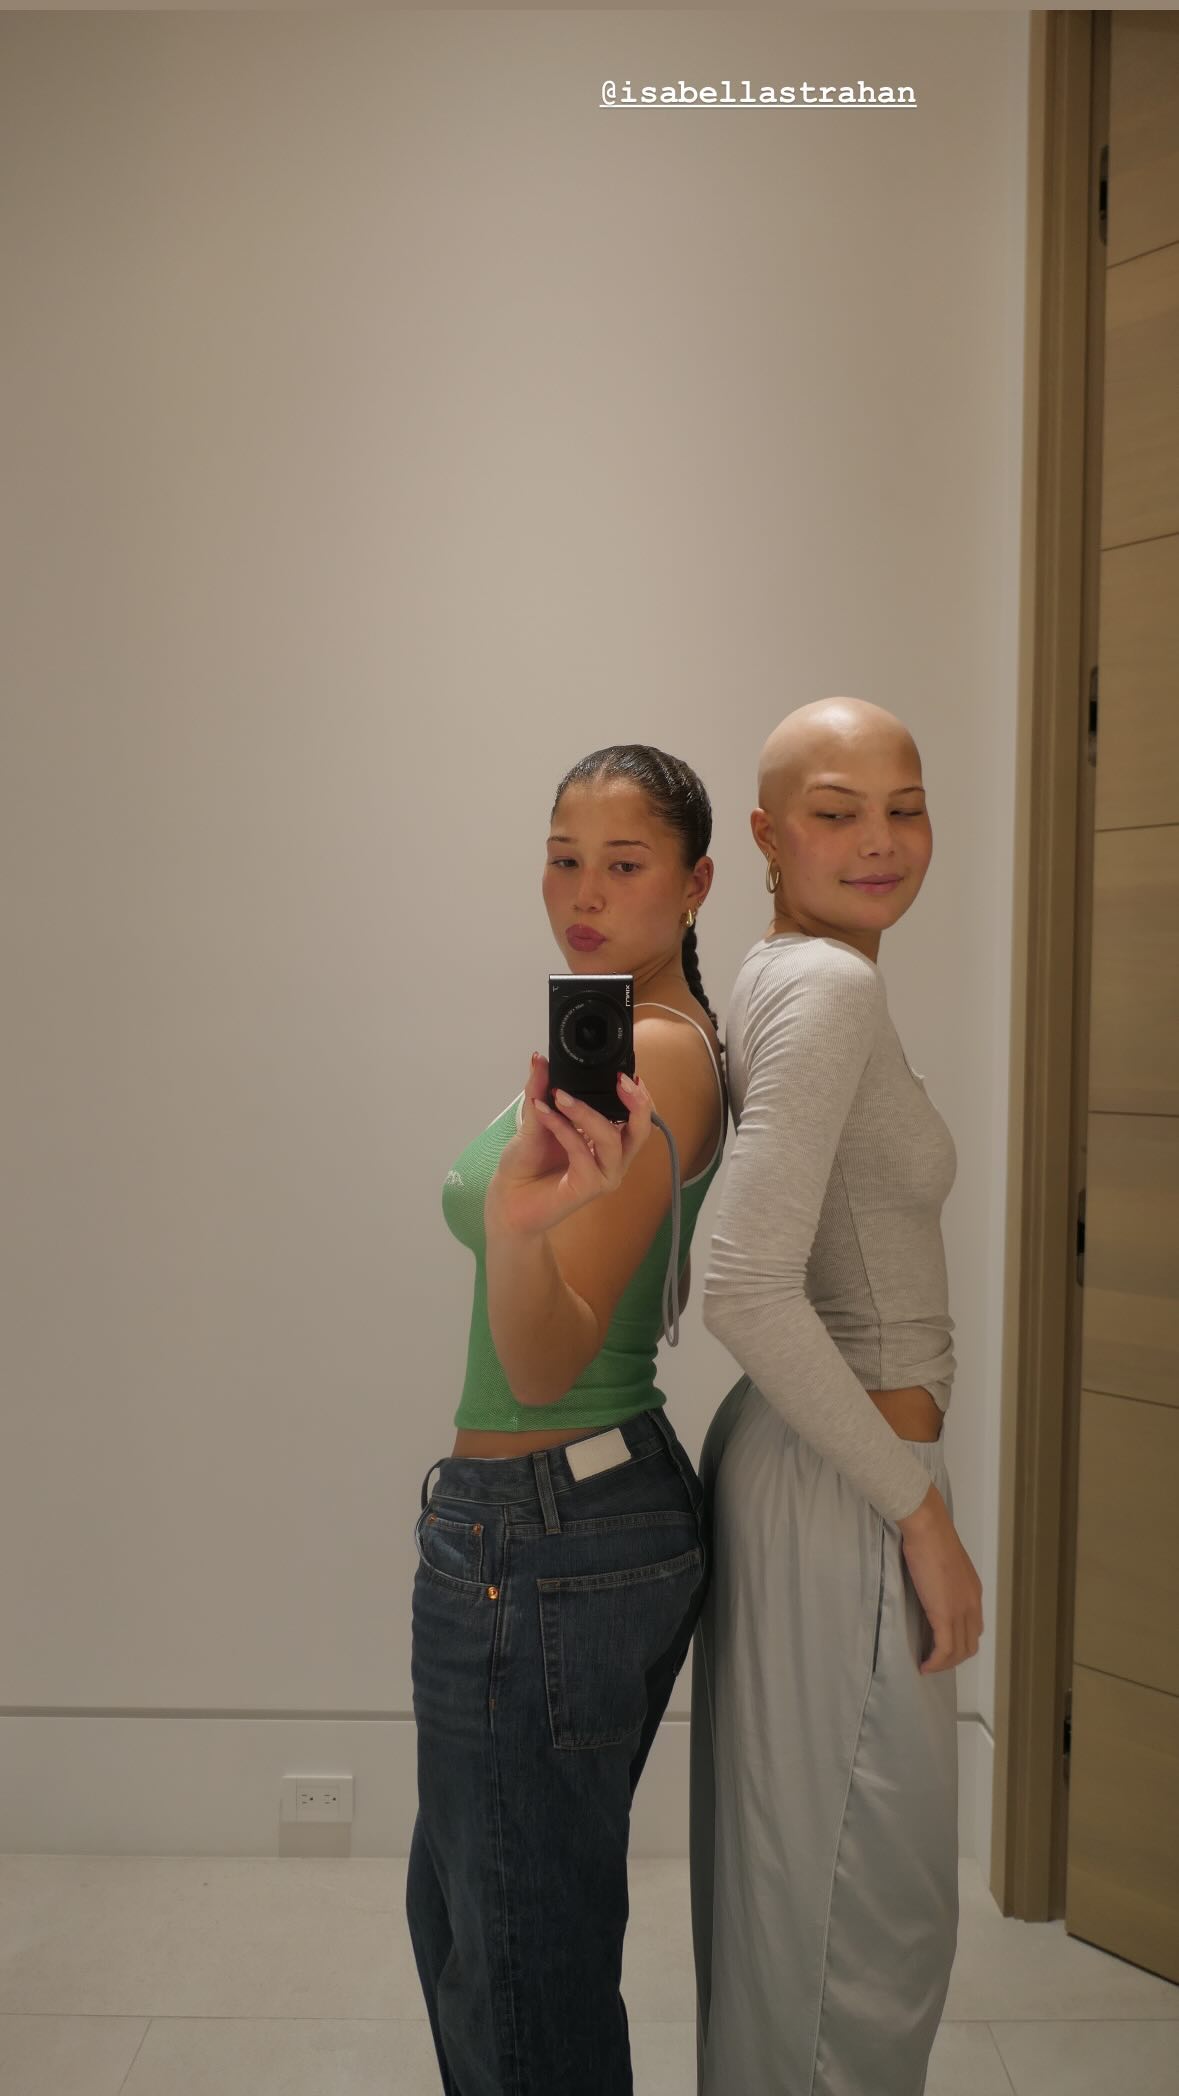 Sophia has been sharing photos from her and Isabella's bonding moments recently amid the USC student's cancer battle